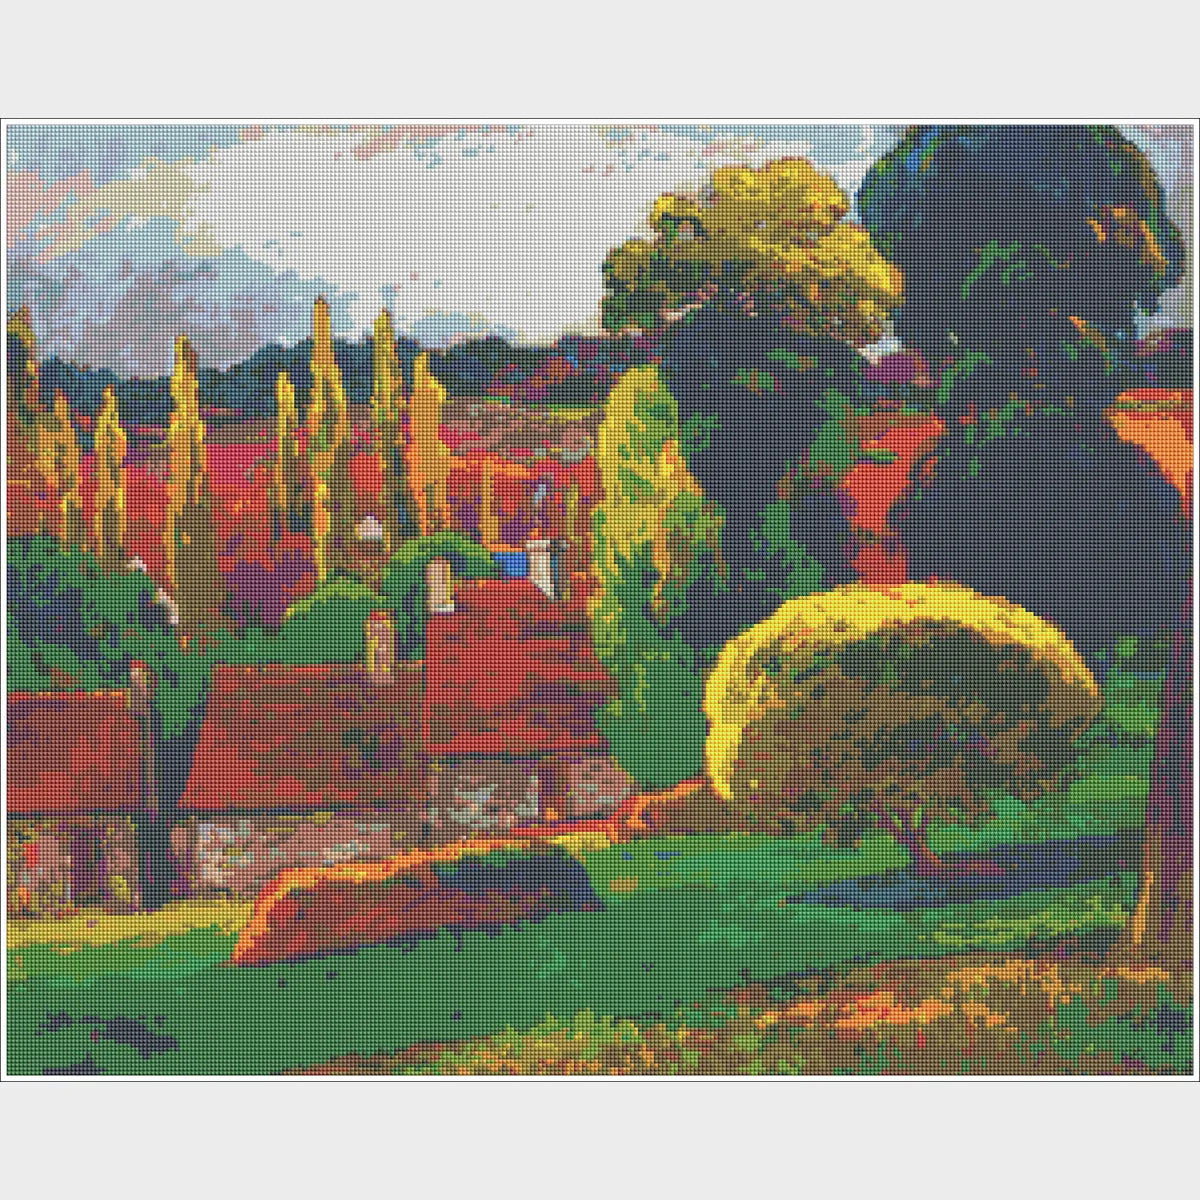 A Farm in Brittany - Diamond Painting Kit-Create your own vibrant masterpiece with our diamond painting kit, reflecting Paul Gauguin's stunning "Brittany Landscape". Immerse in a calming art project today.-Canvas by Numbers